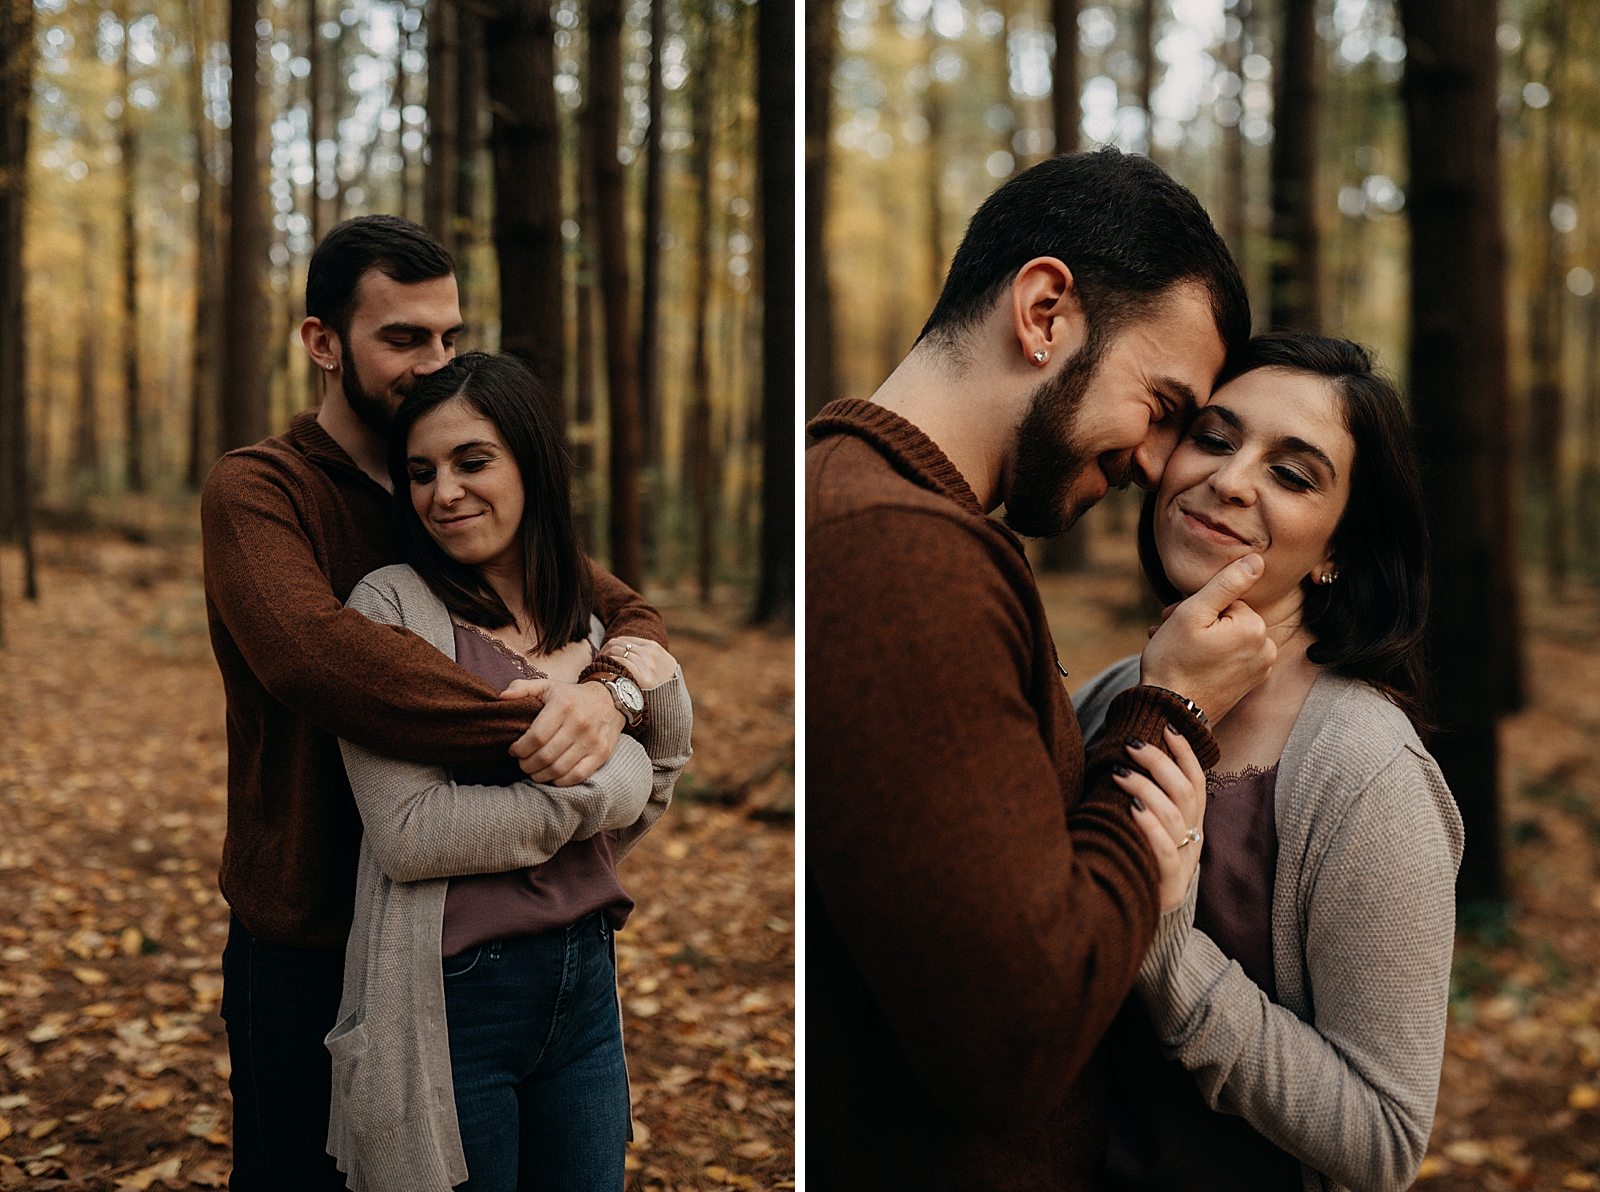 Man wrapping arms around woman in autumn forest